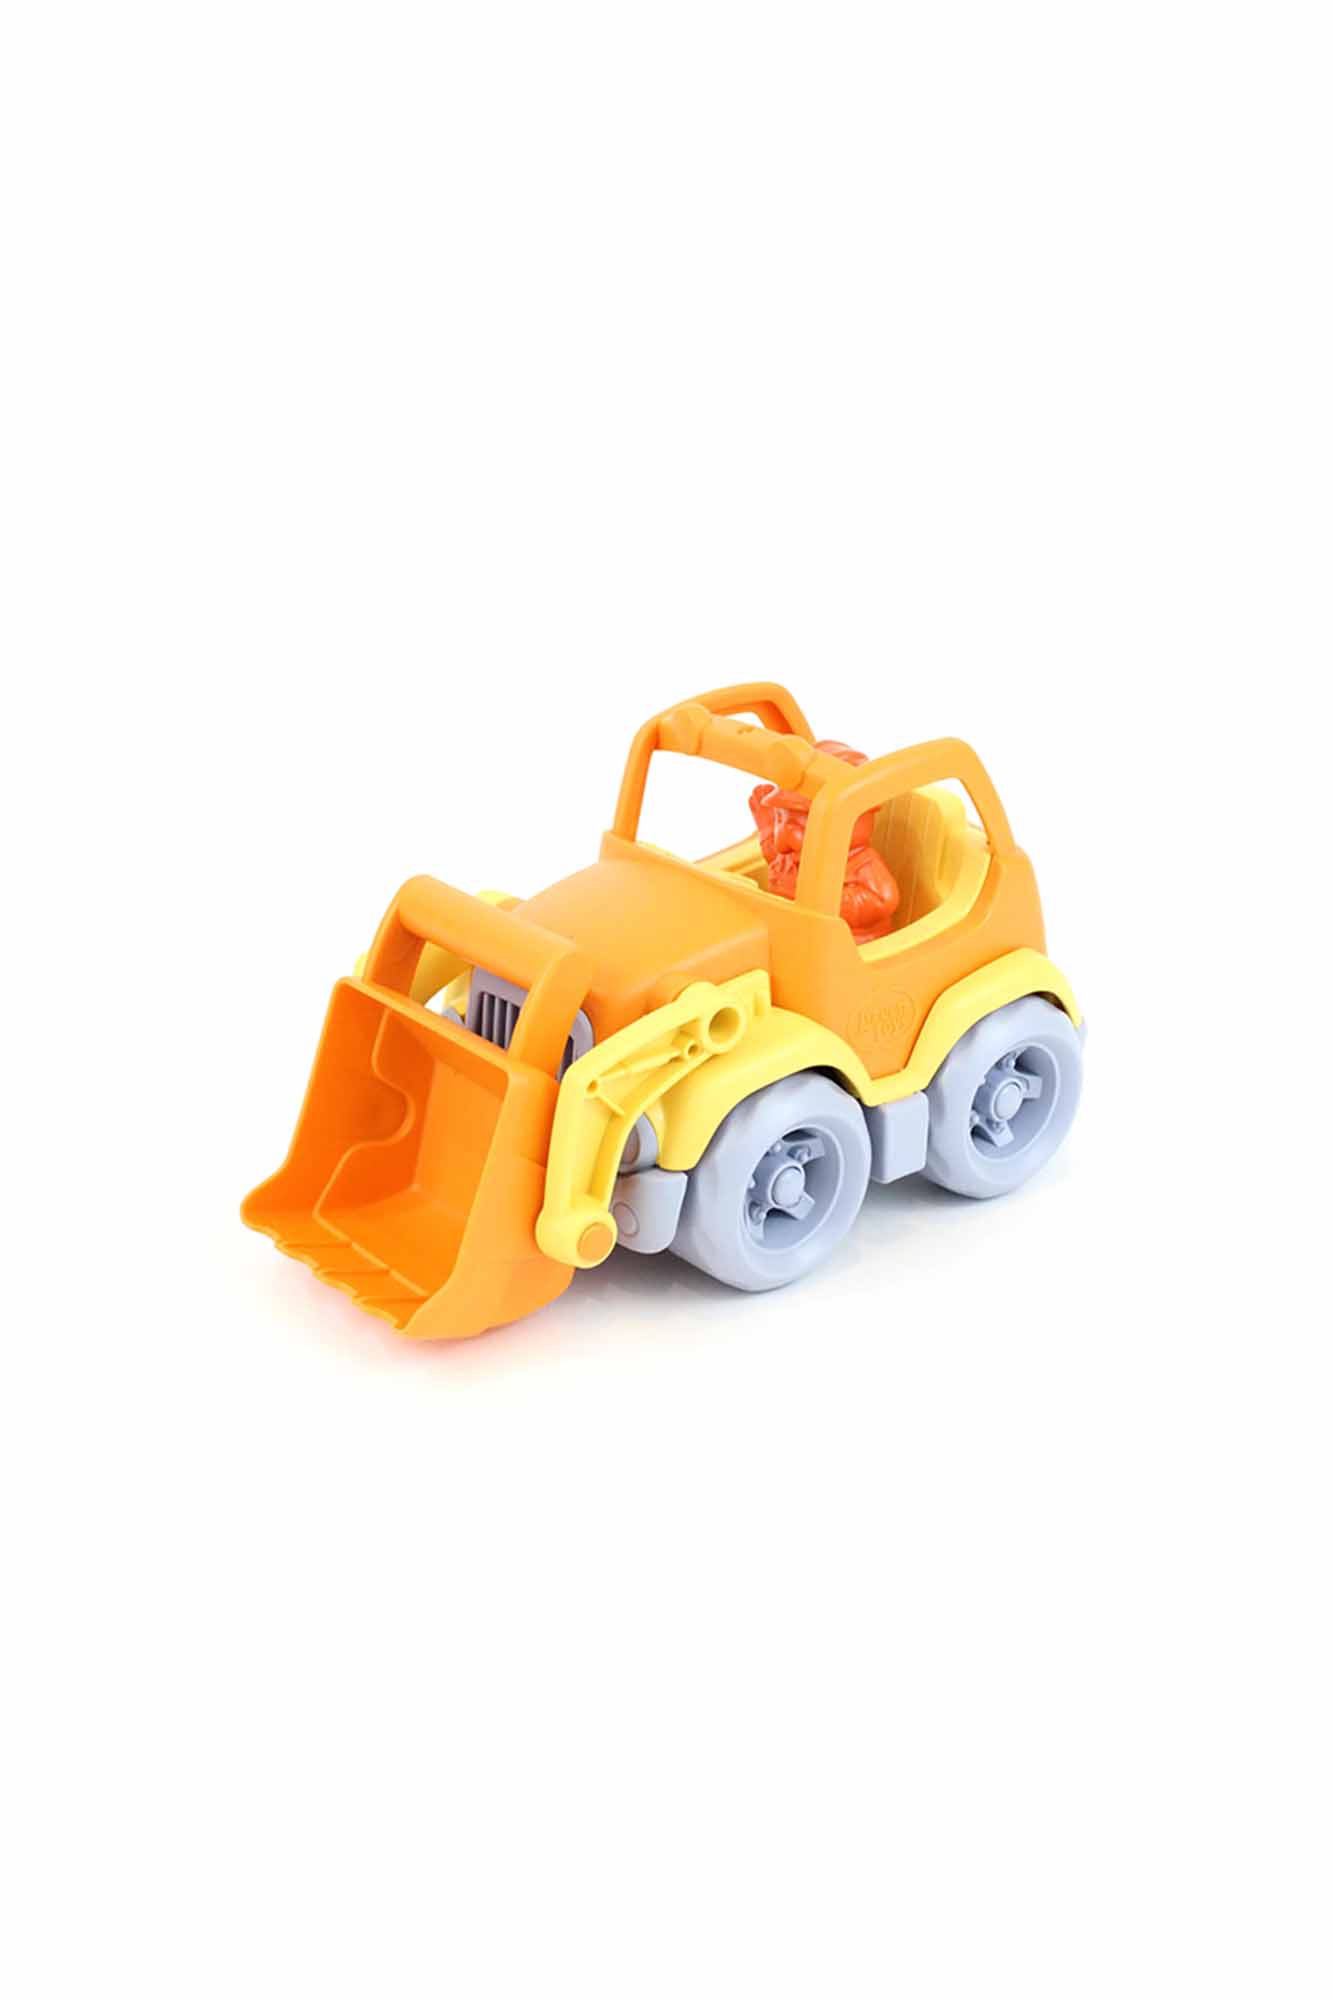 GREEN TOYS SCOOPER CONSTRUCTION TRUCK